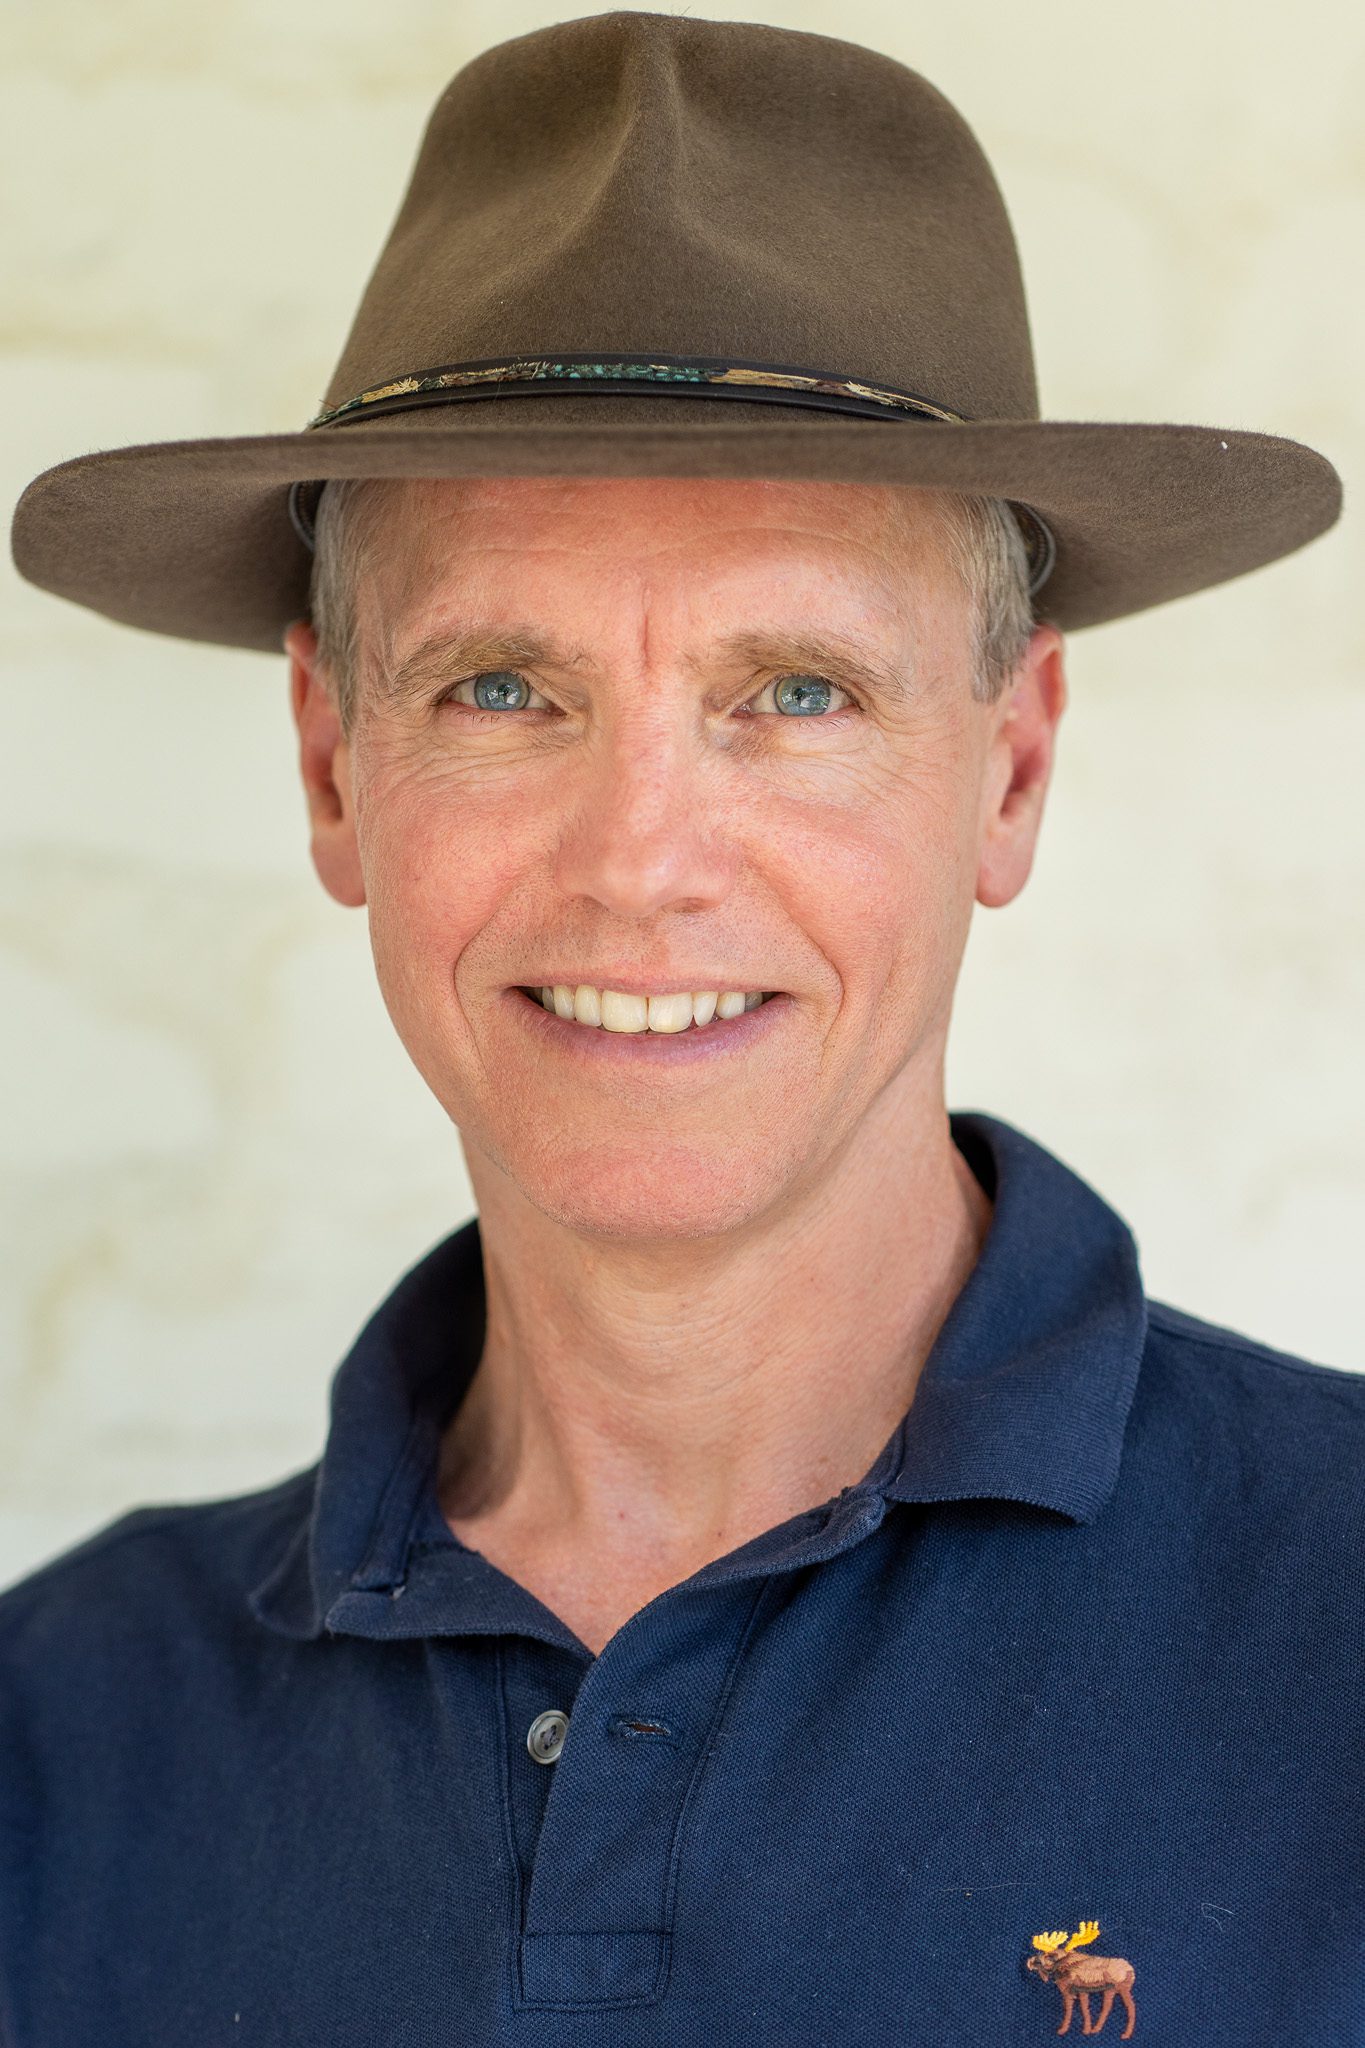 a white middle-aged man with short hair wearing a hat and looking into the camera as his corporate headshots are taken